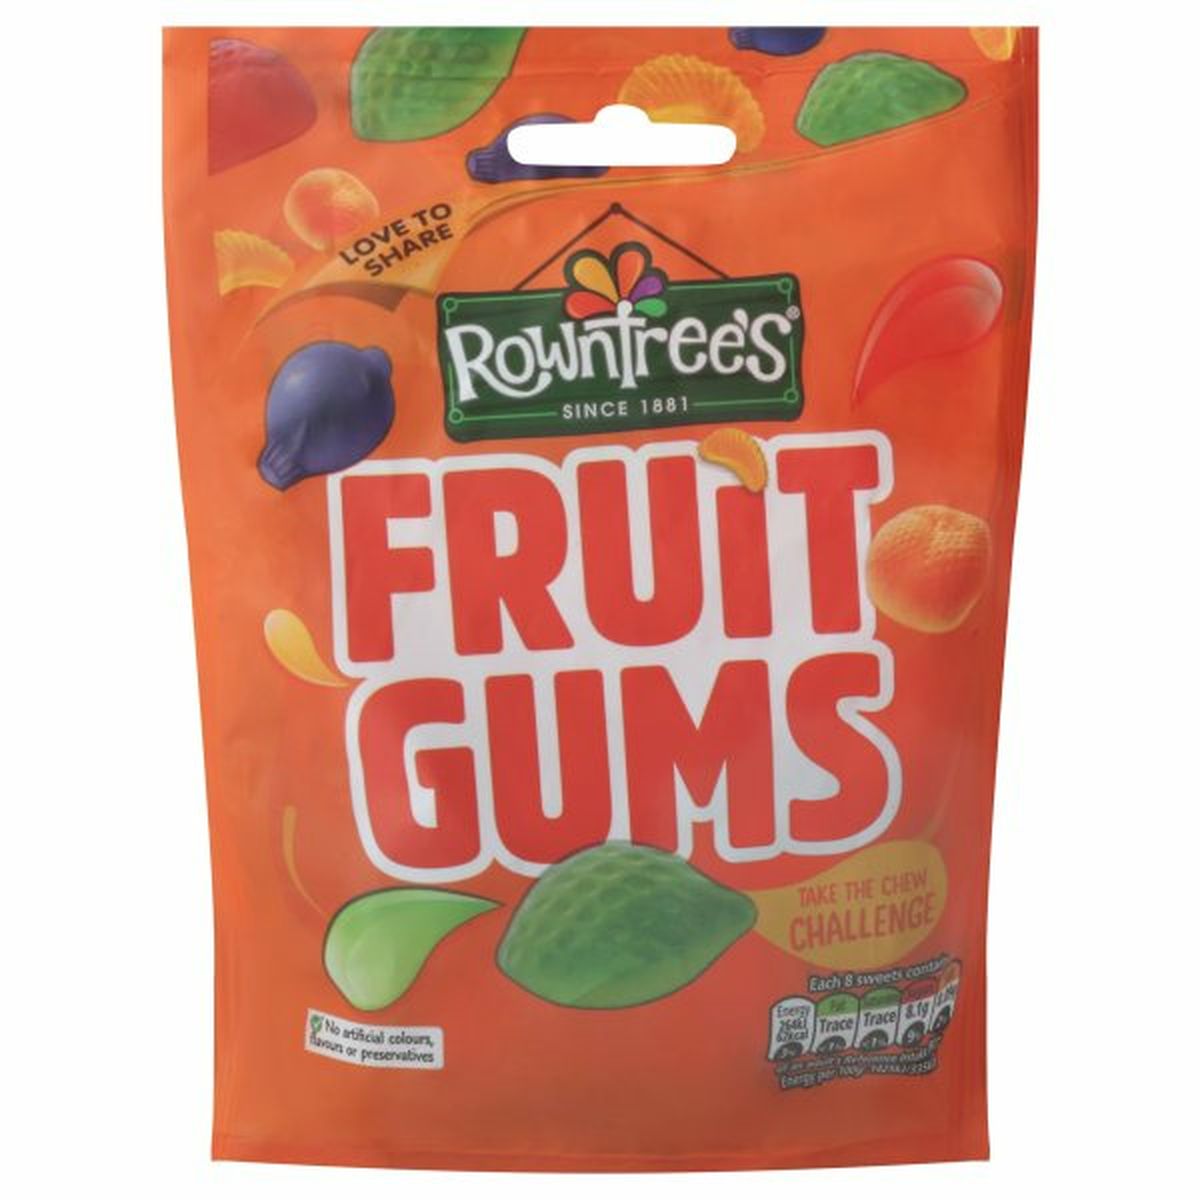 Calories in Rowntree's Fruit Gums